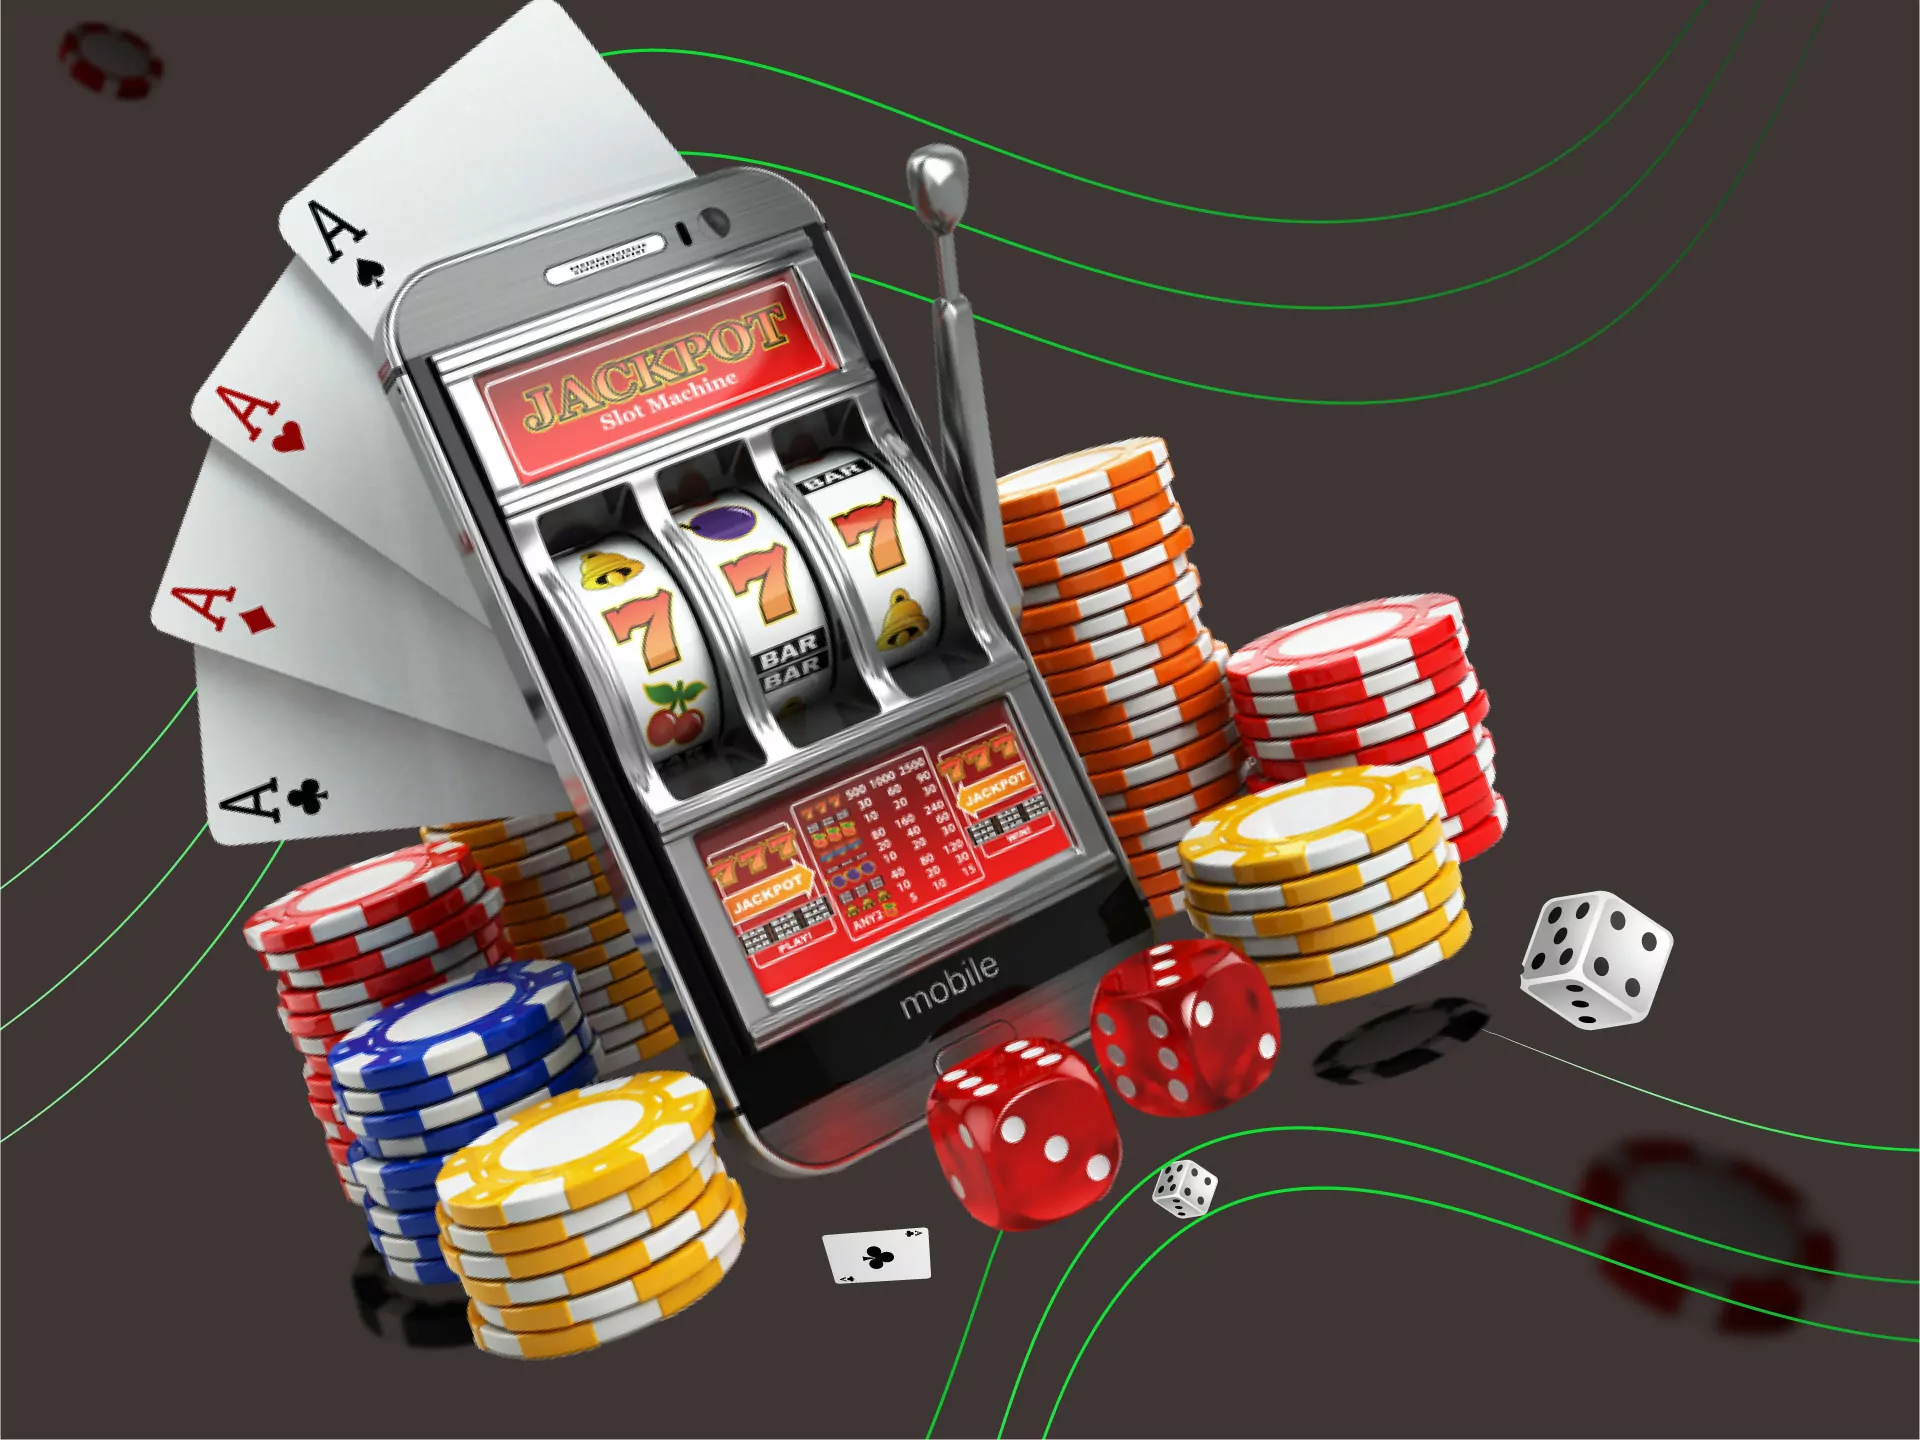 We have several features that we consider choosing the best poker room.